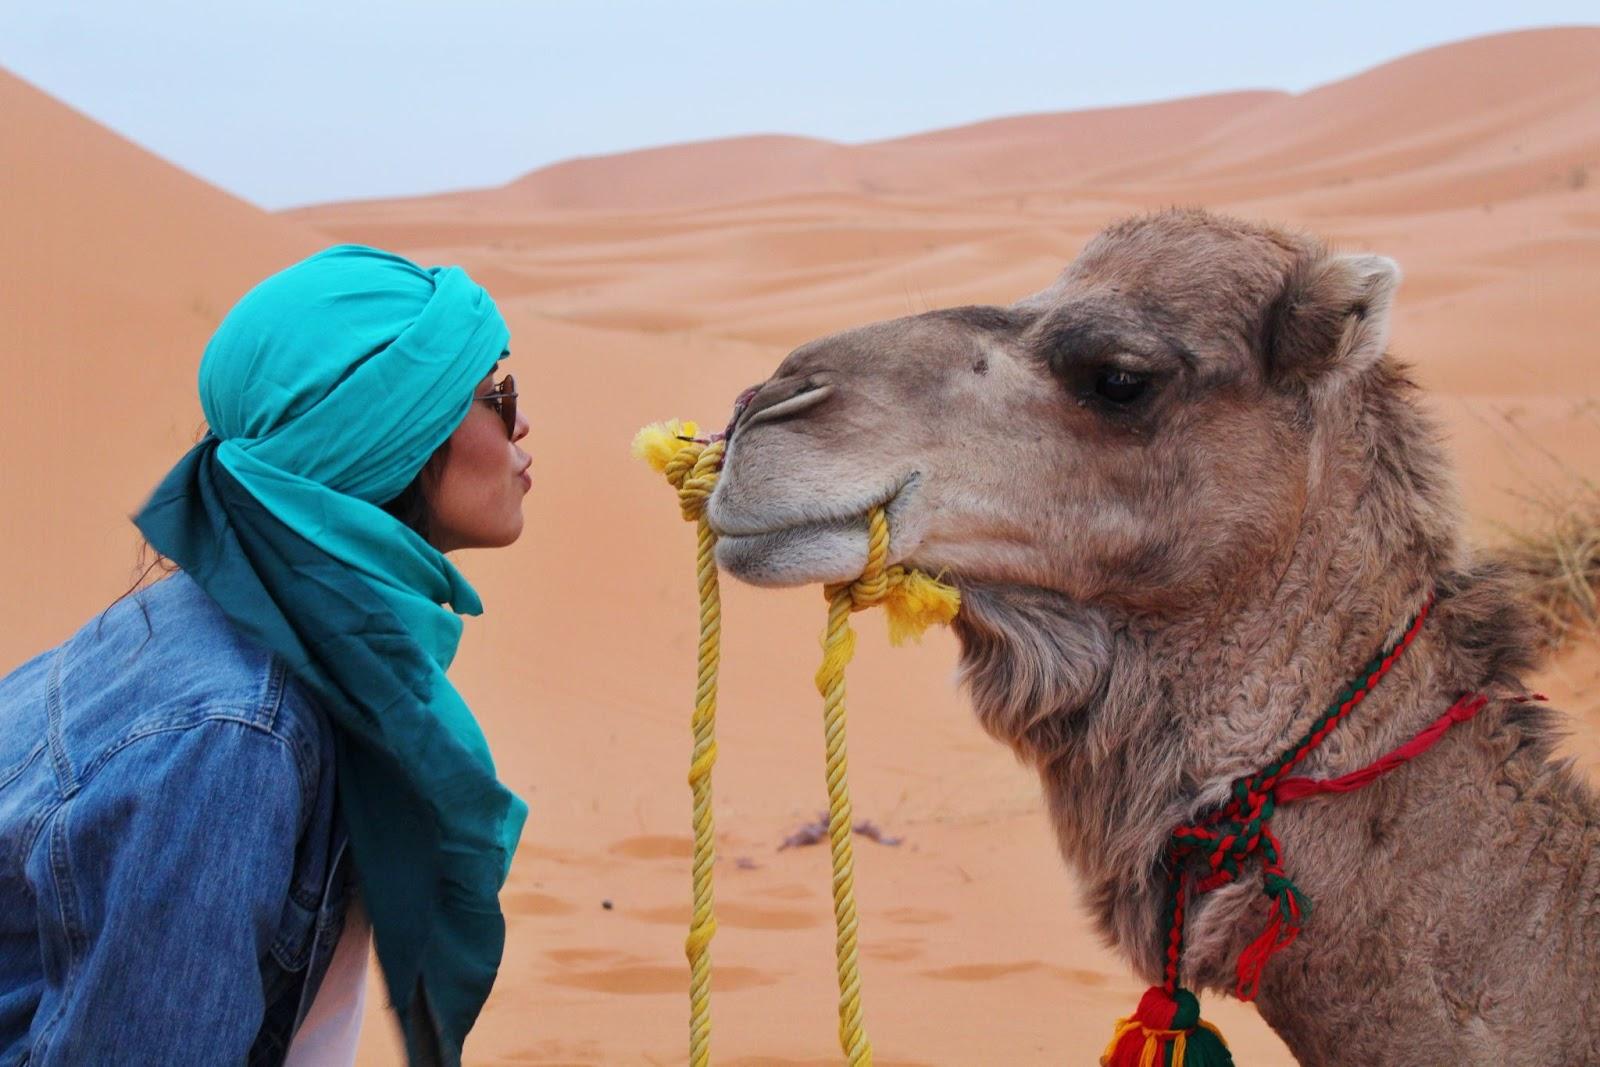 A women staring into the eyes of a camel from close up. Experience paid for by converting British pounds to MAD - common currency pairings.